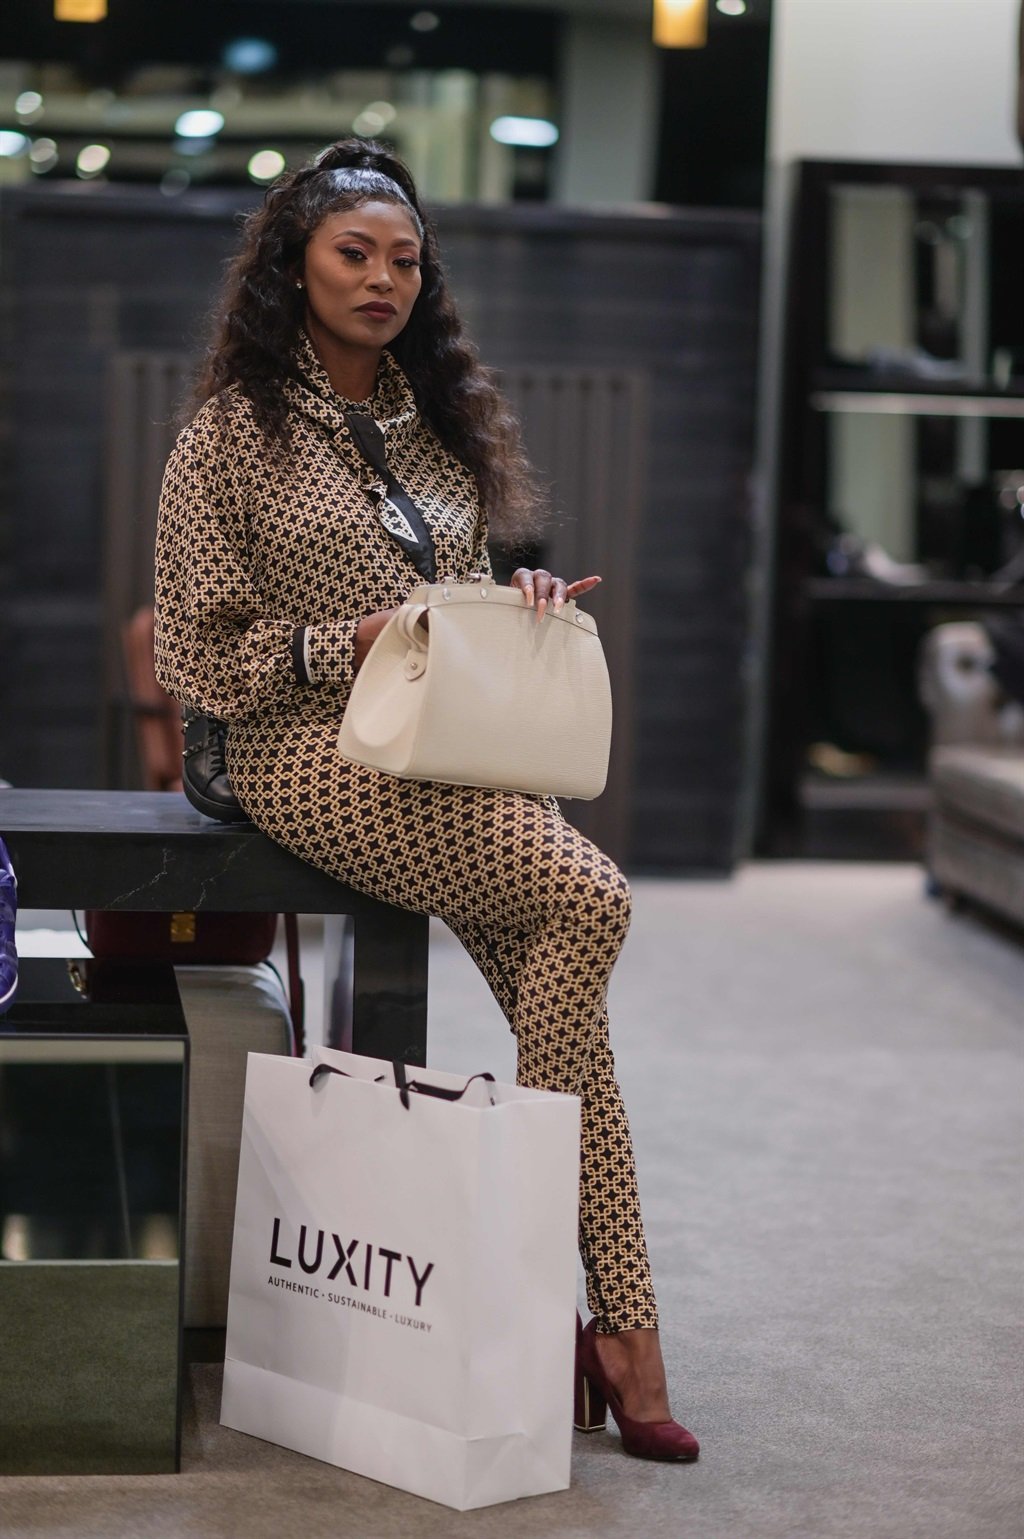 Louis Vuitton is SA's favourite luxury brand with Chanel, Gucci